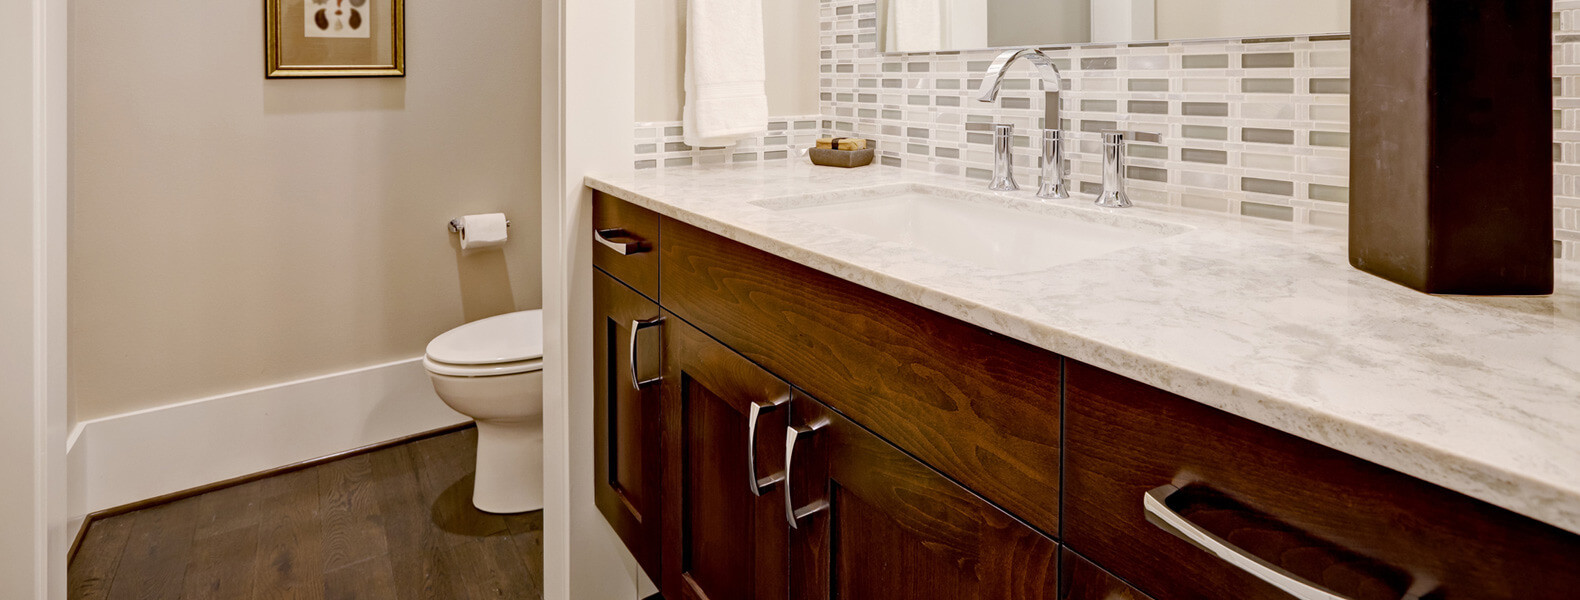  |  Sewickley Kitchen and Bathroom Remodeling | Patete Kitchen and Bath